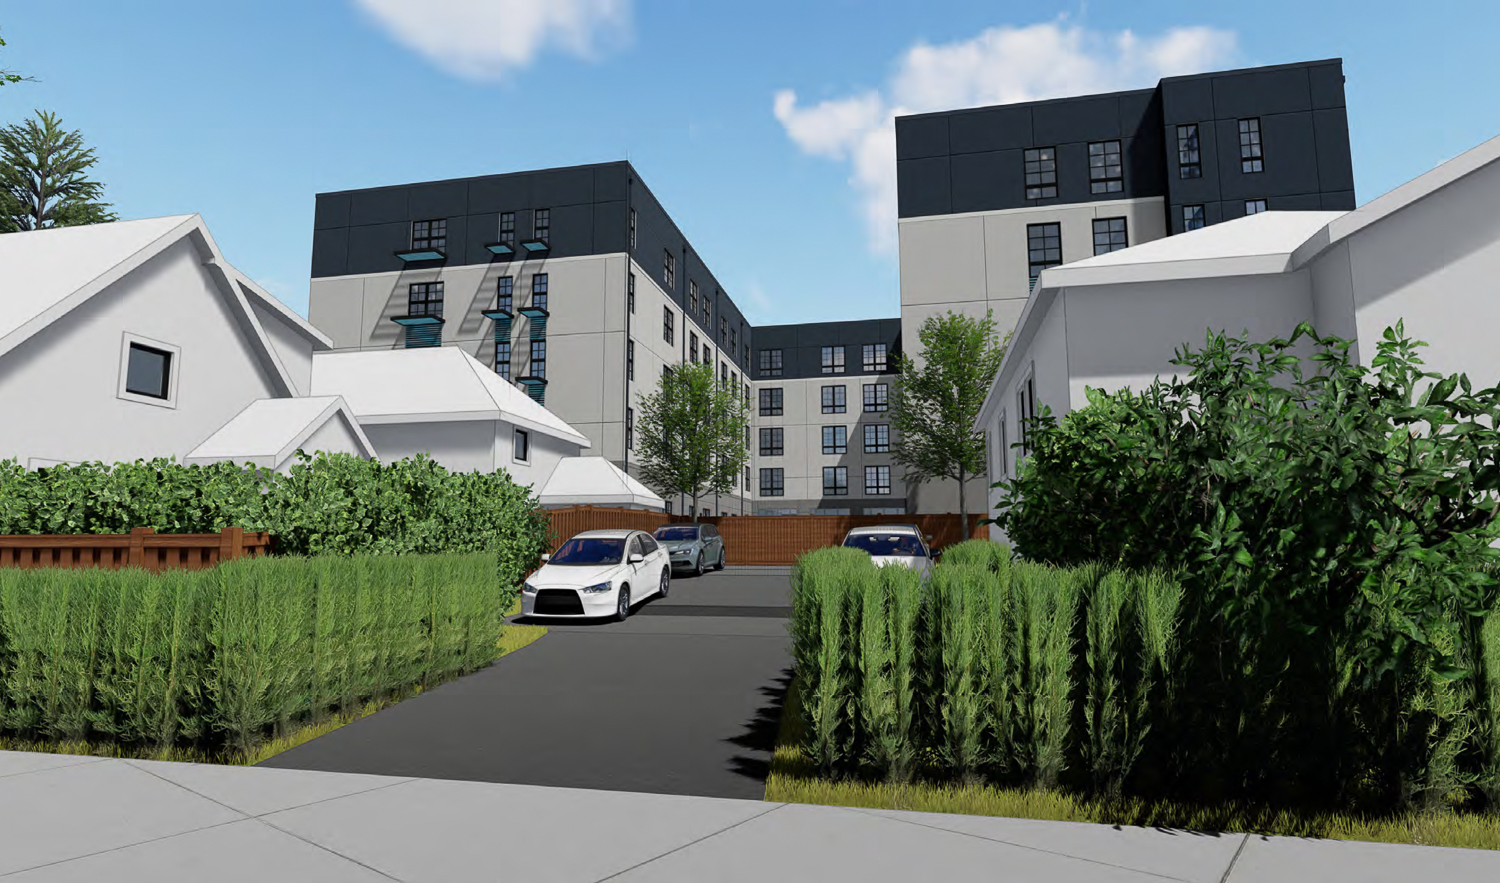 3030 Telegraph Avenue as seen from adjacent housing, rendering by Left Coast Architecture